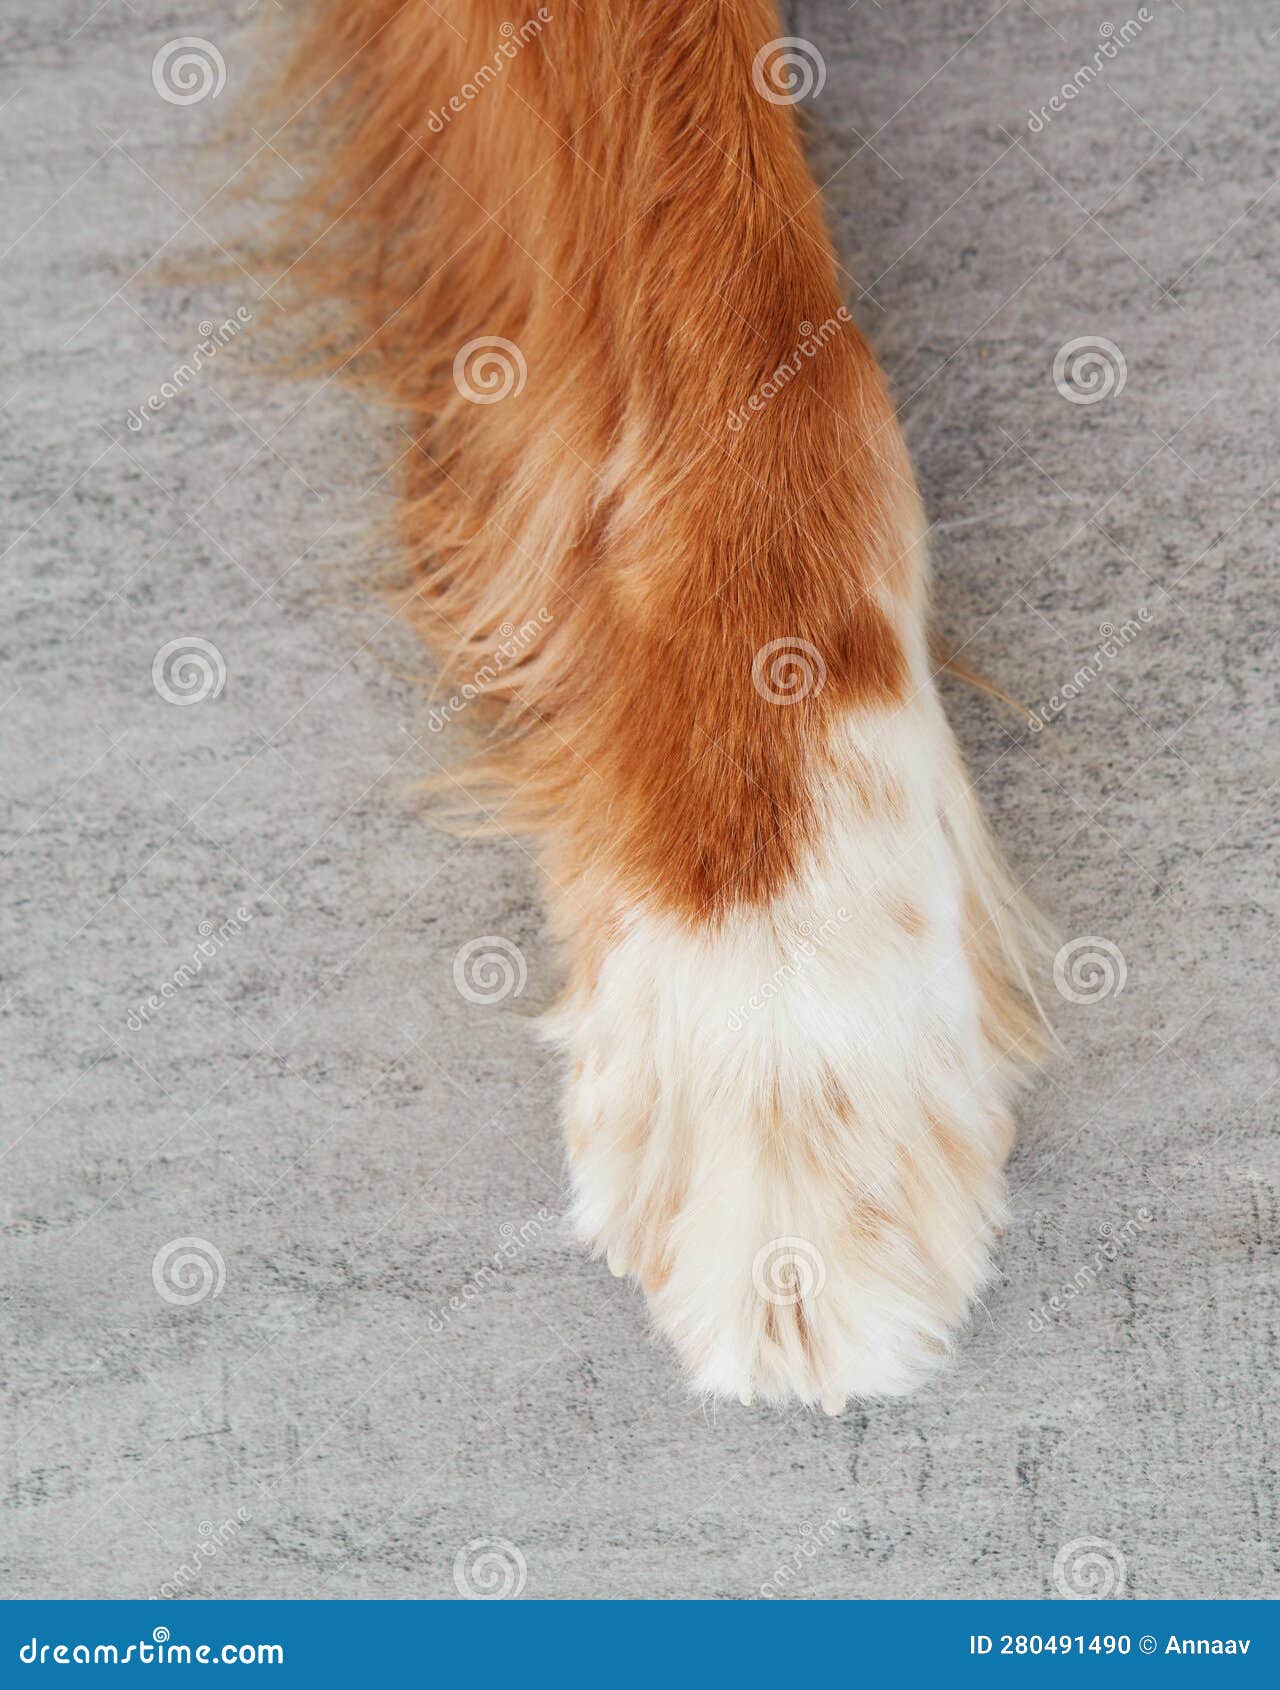 red - white dog paw. close-up